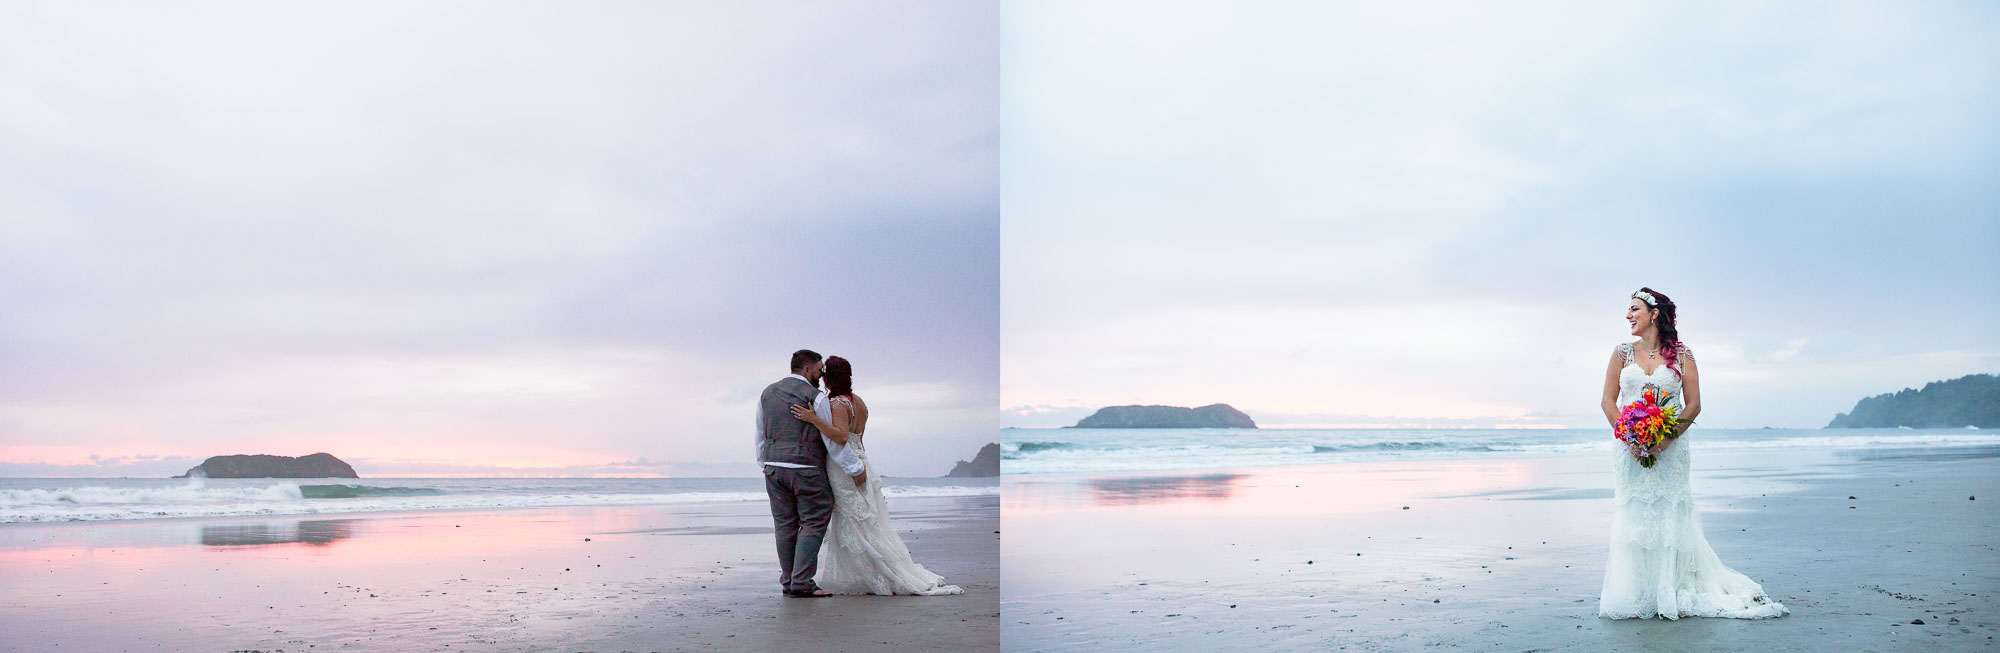 Bridal portraits on the beach in between the raindrops